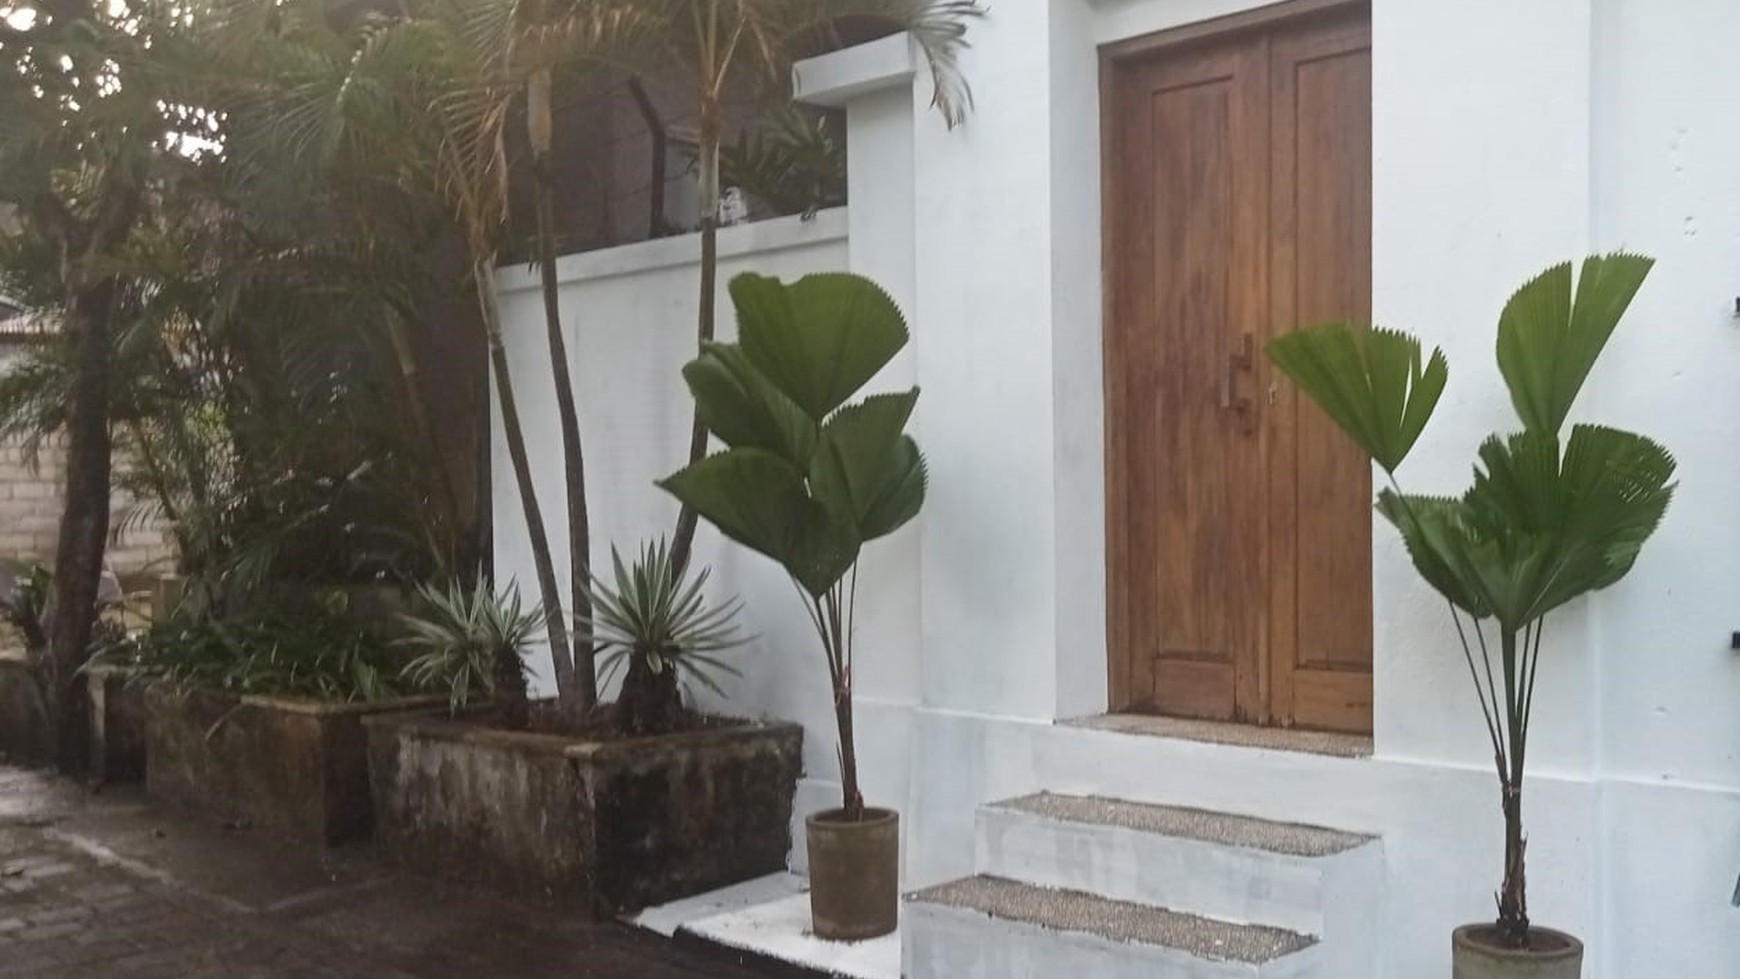 For Rent Yearly - Modern nice villa 3 bedrooms in Pererenan